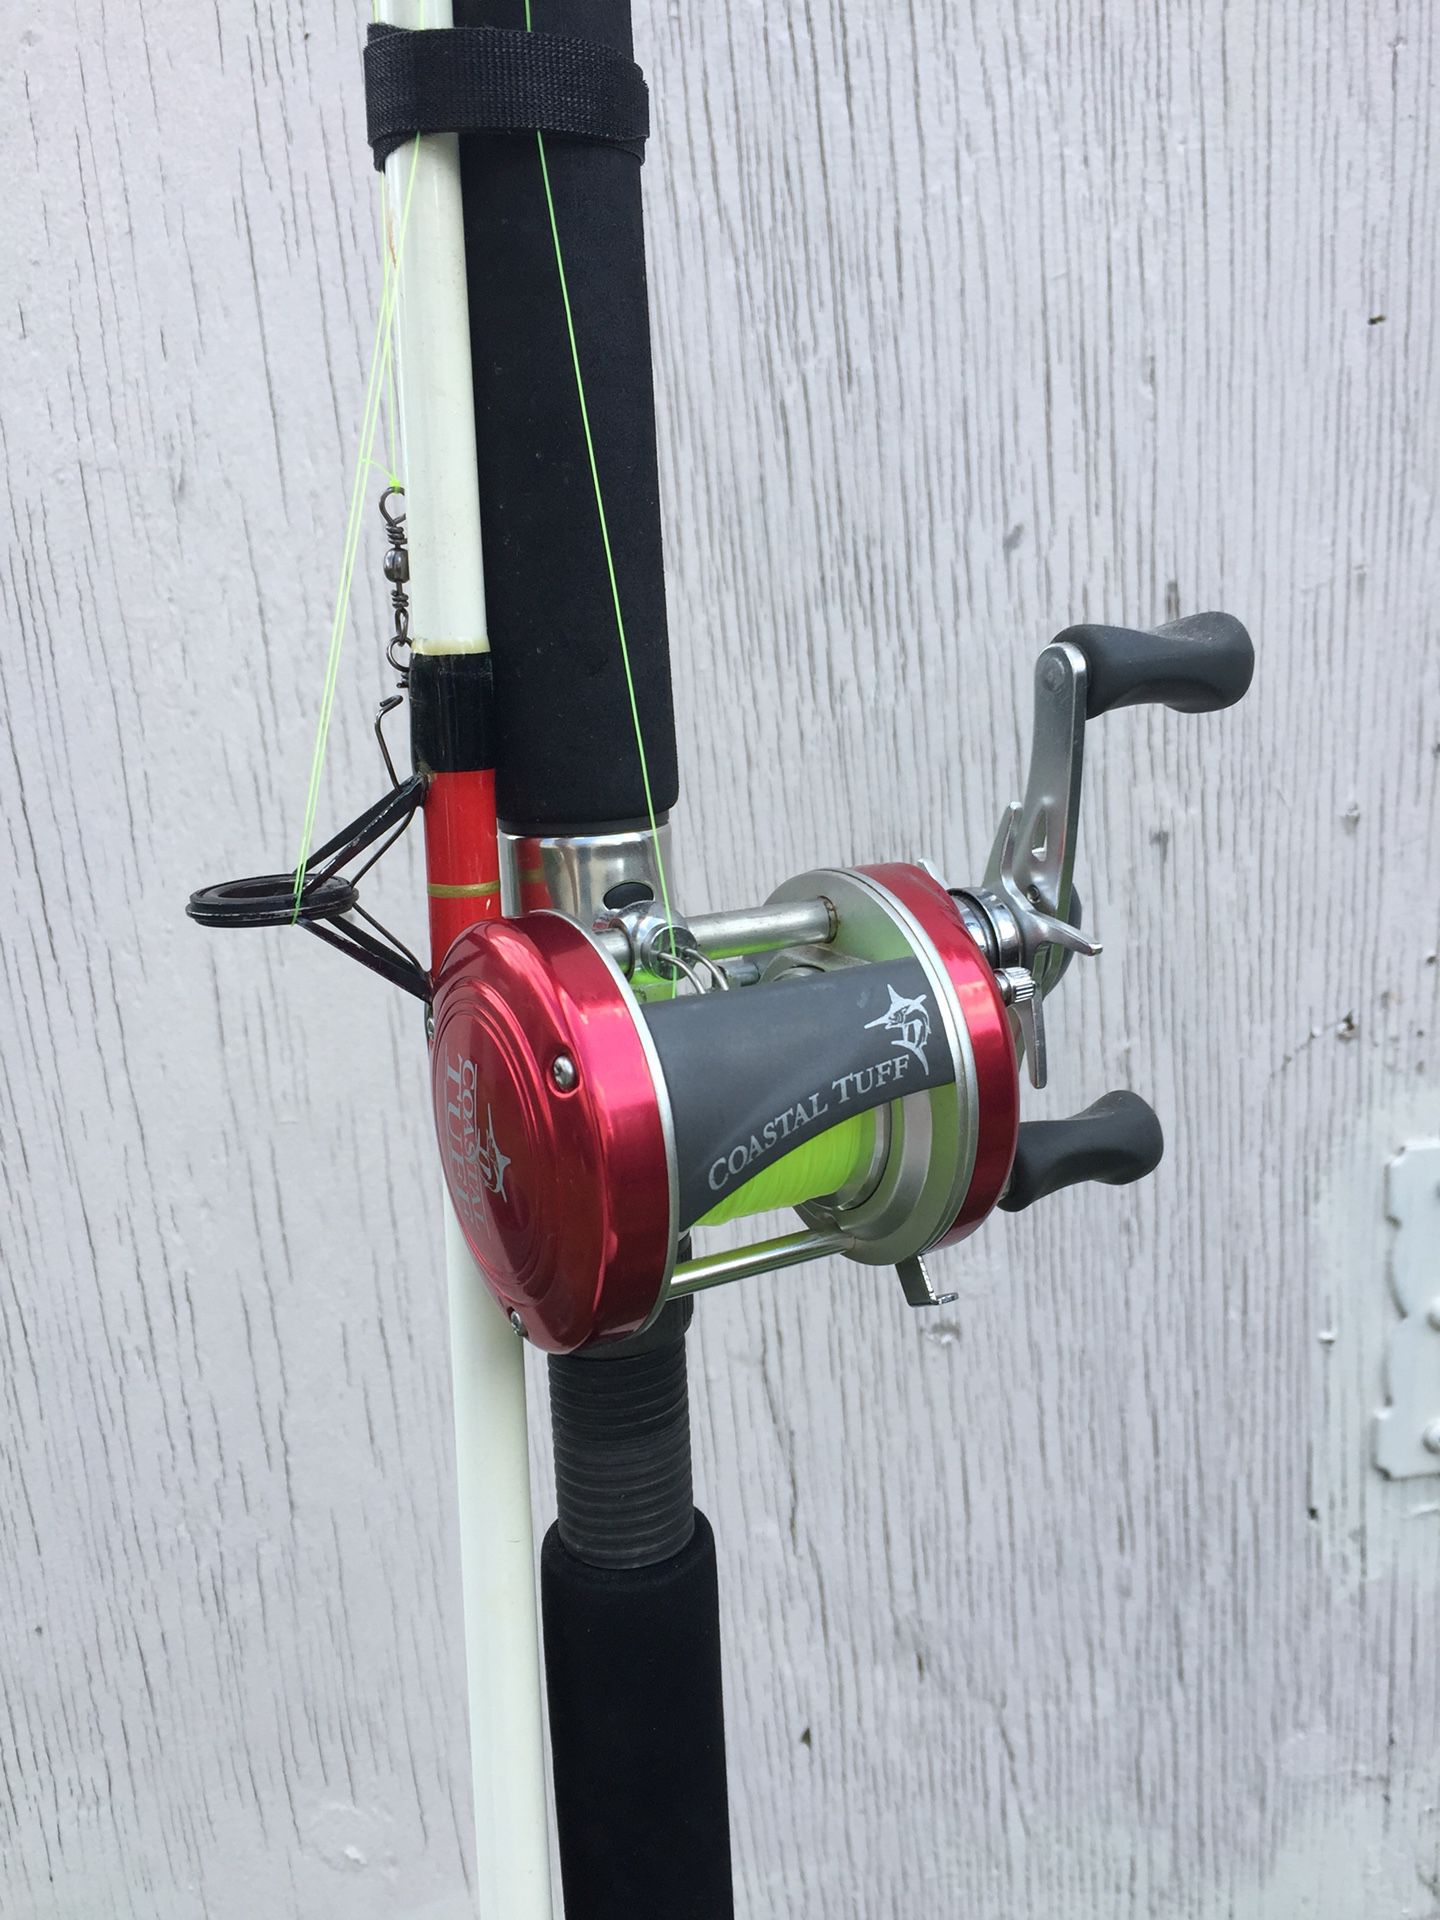 Shakespeare ATS Trolling Reel for Sale in South Gate, CA - OfferUp